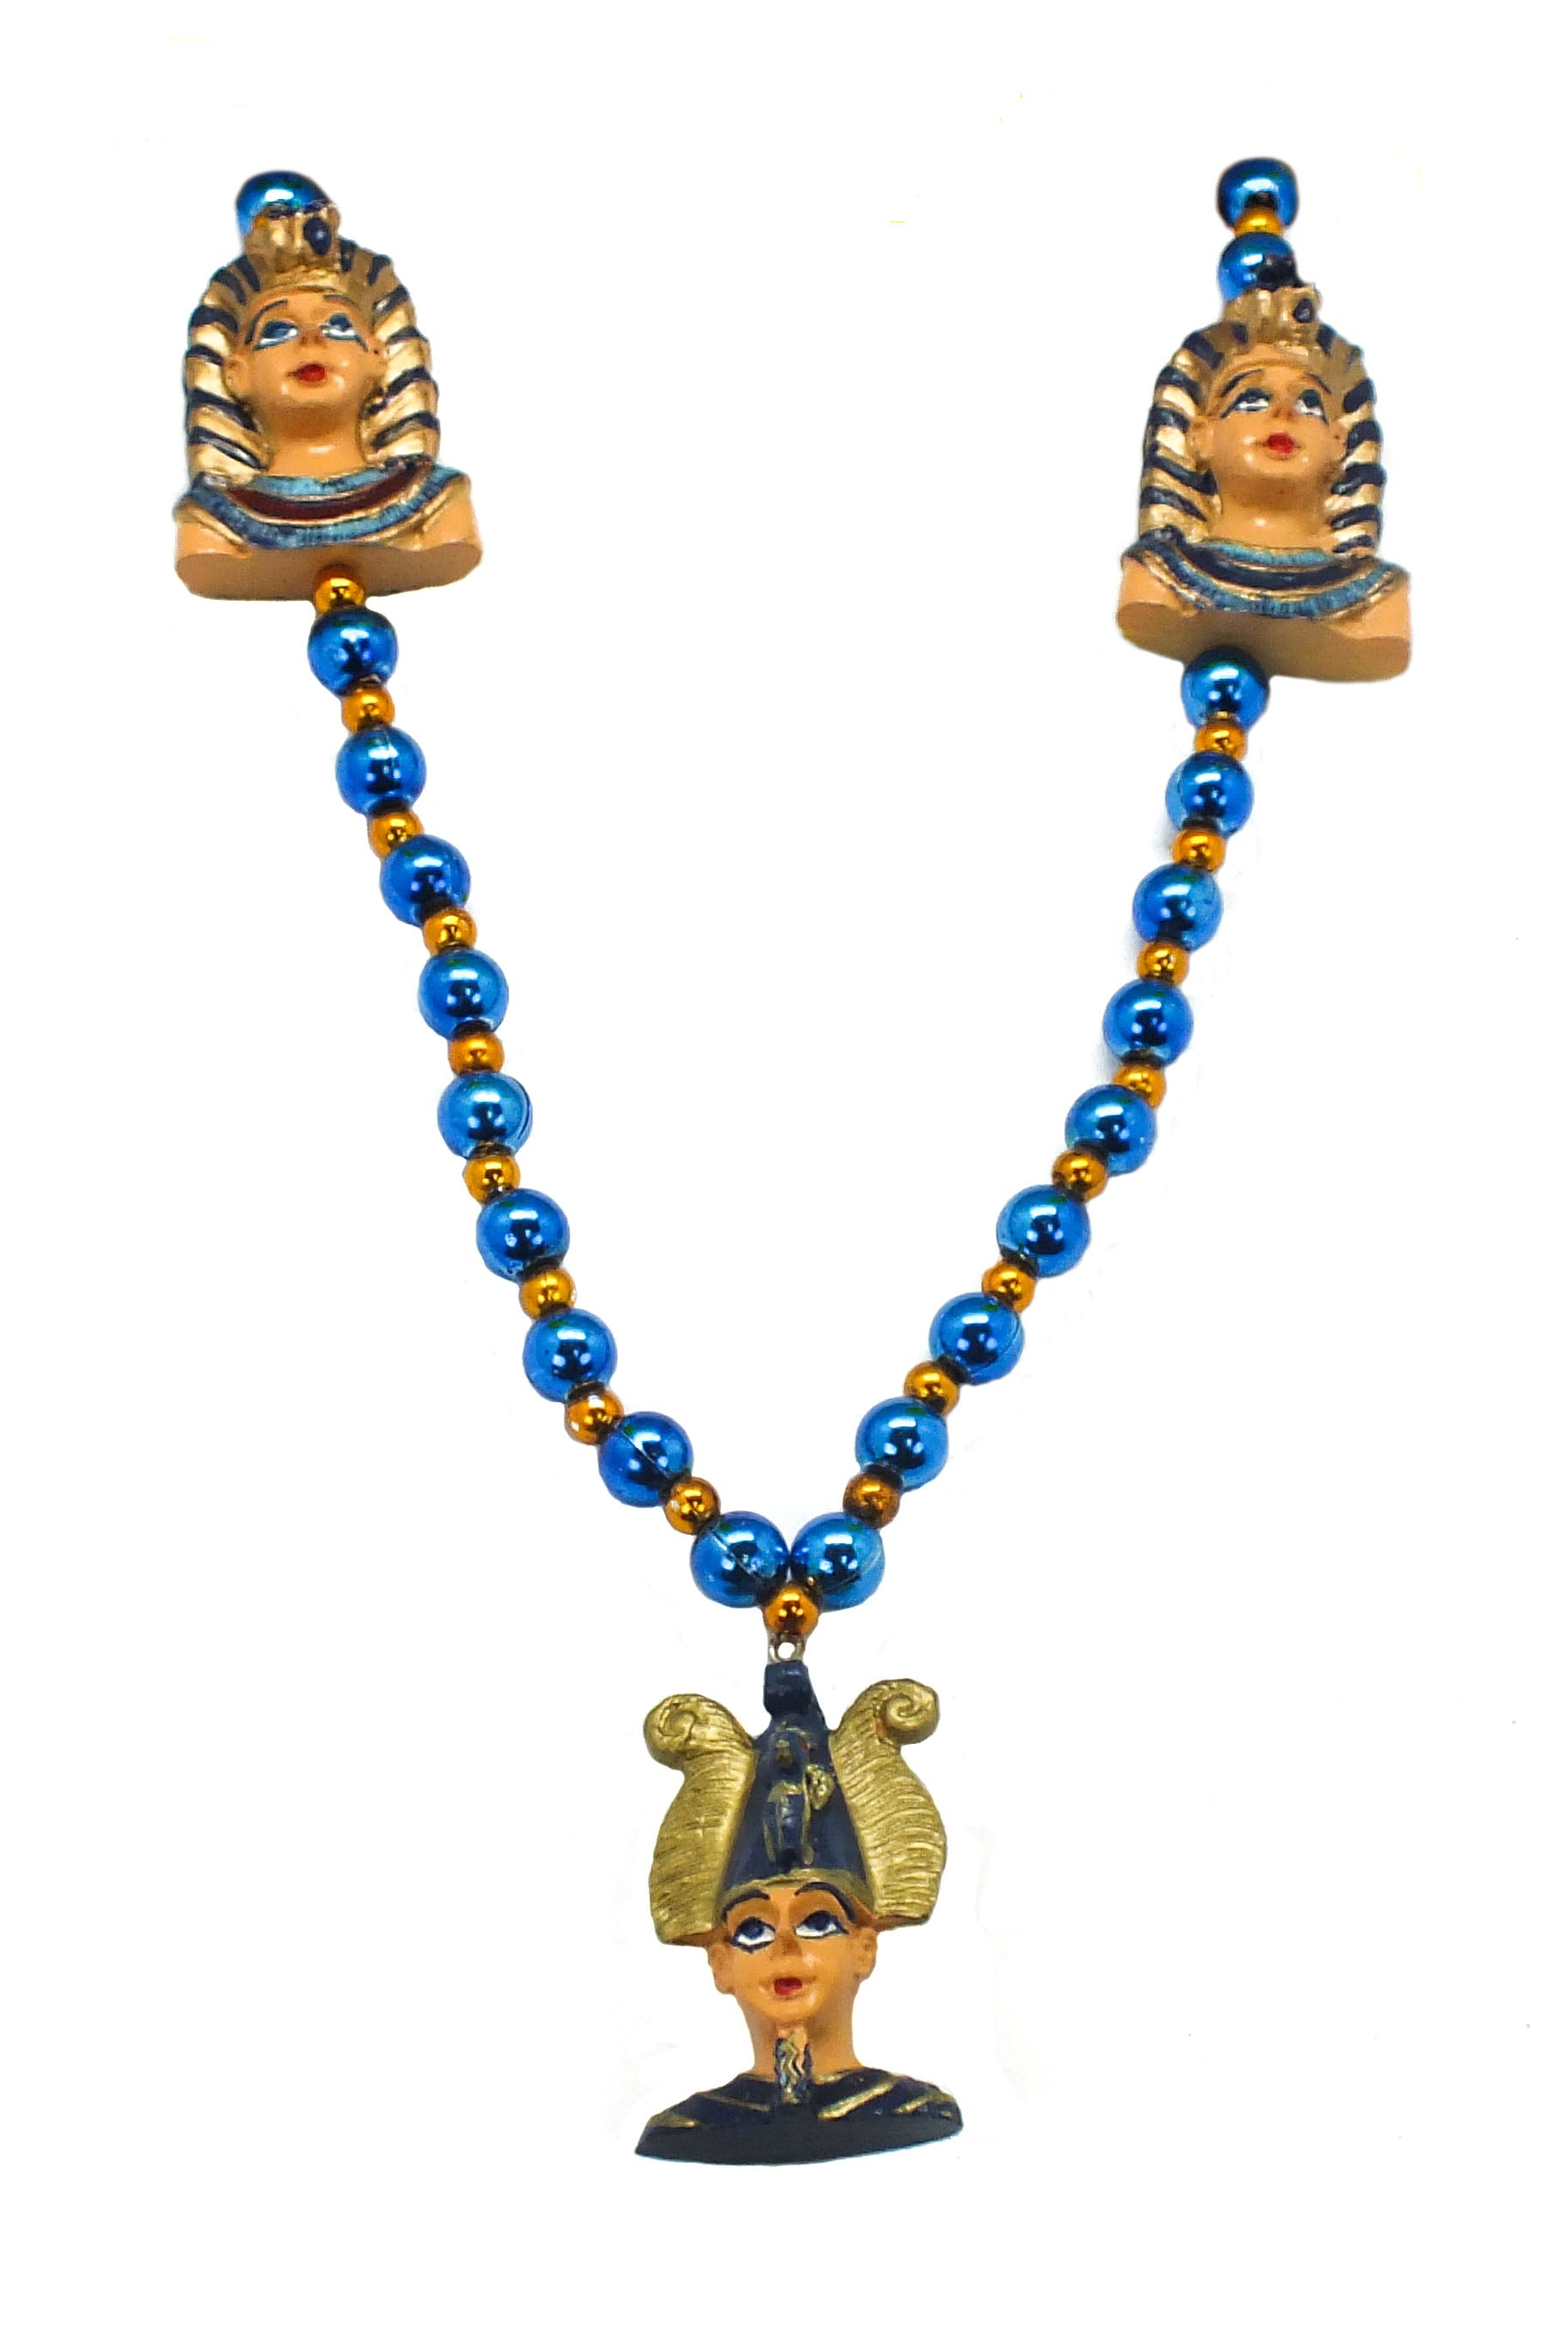 42" Pharaoh Heads with Blue and Gold Beads